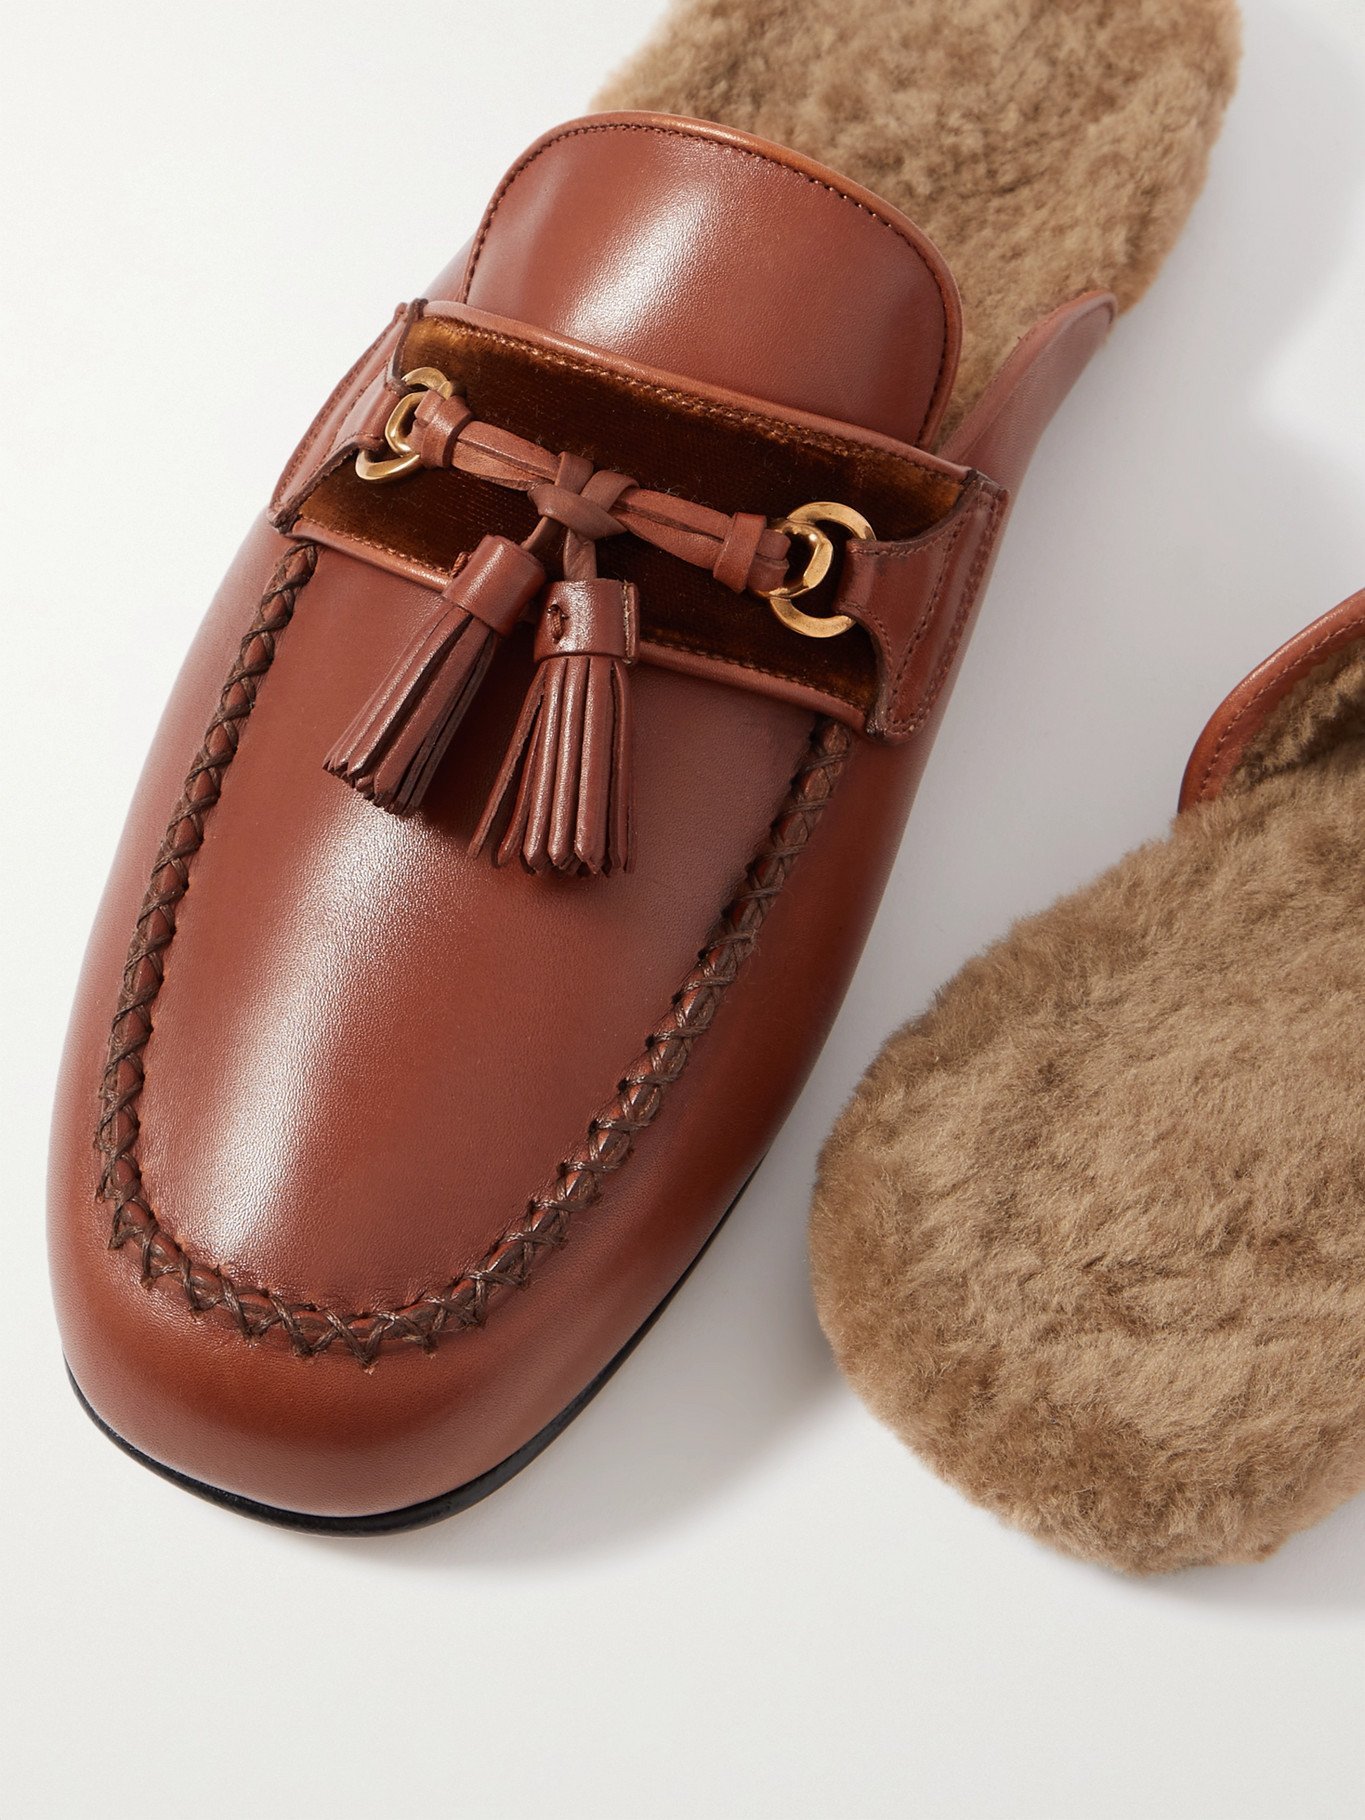 TOM FORD - Stephan Shearling-Lined Leather Tasselled Backless Loafers -  Brown - UK 8 TOM FORD